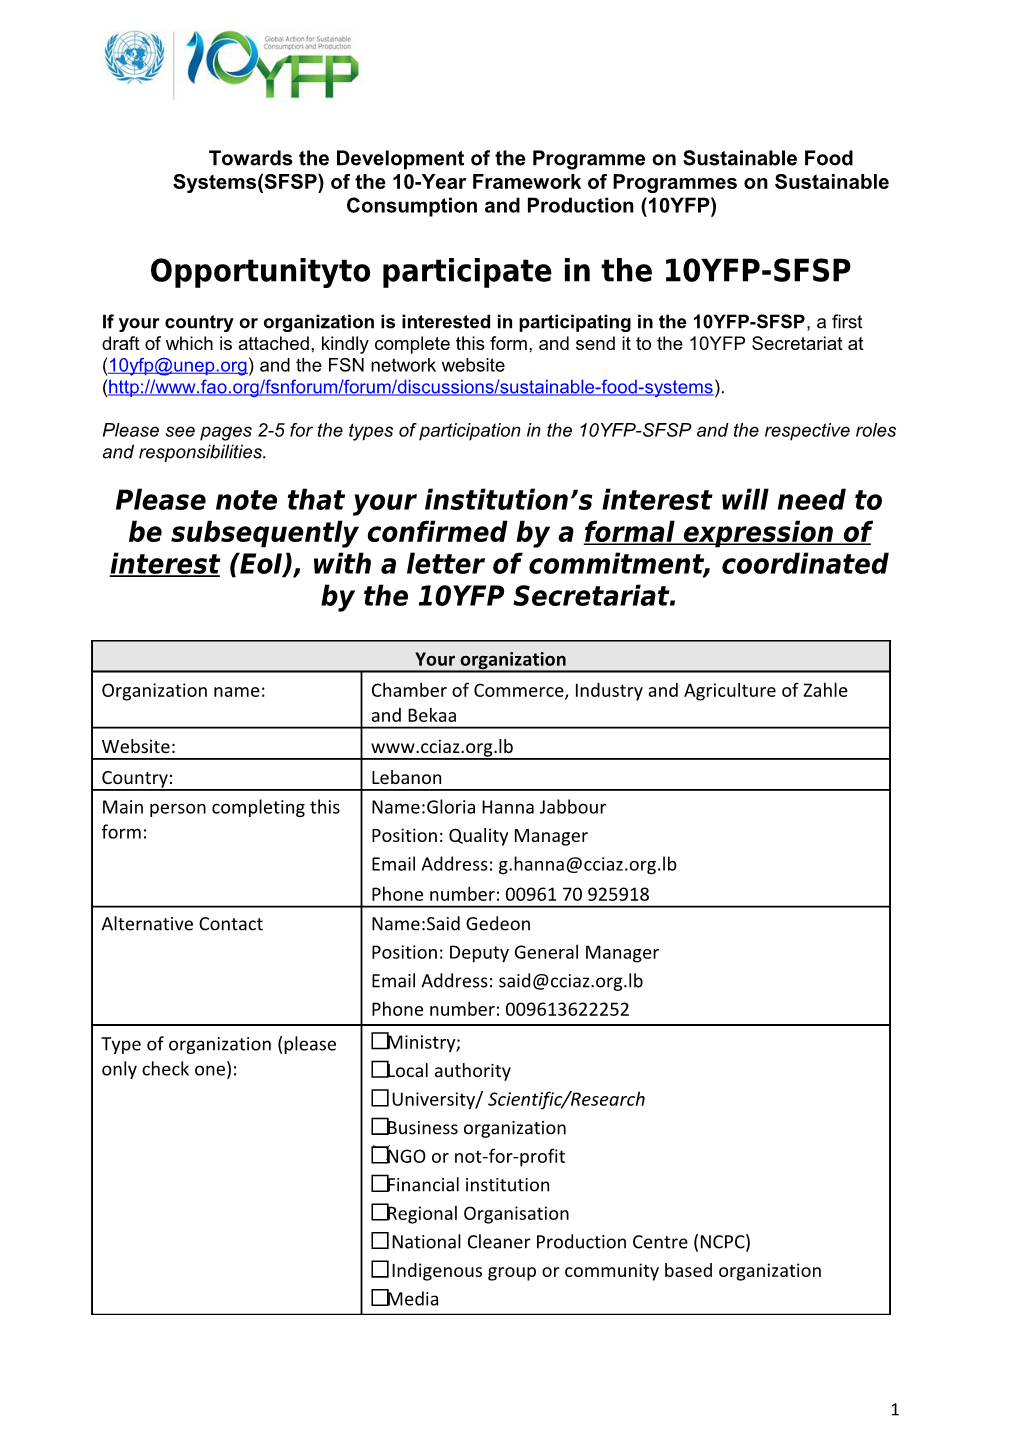 Opportunityto Participate in the 10YFP-SFSP